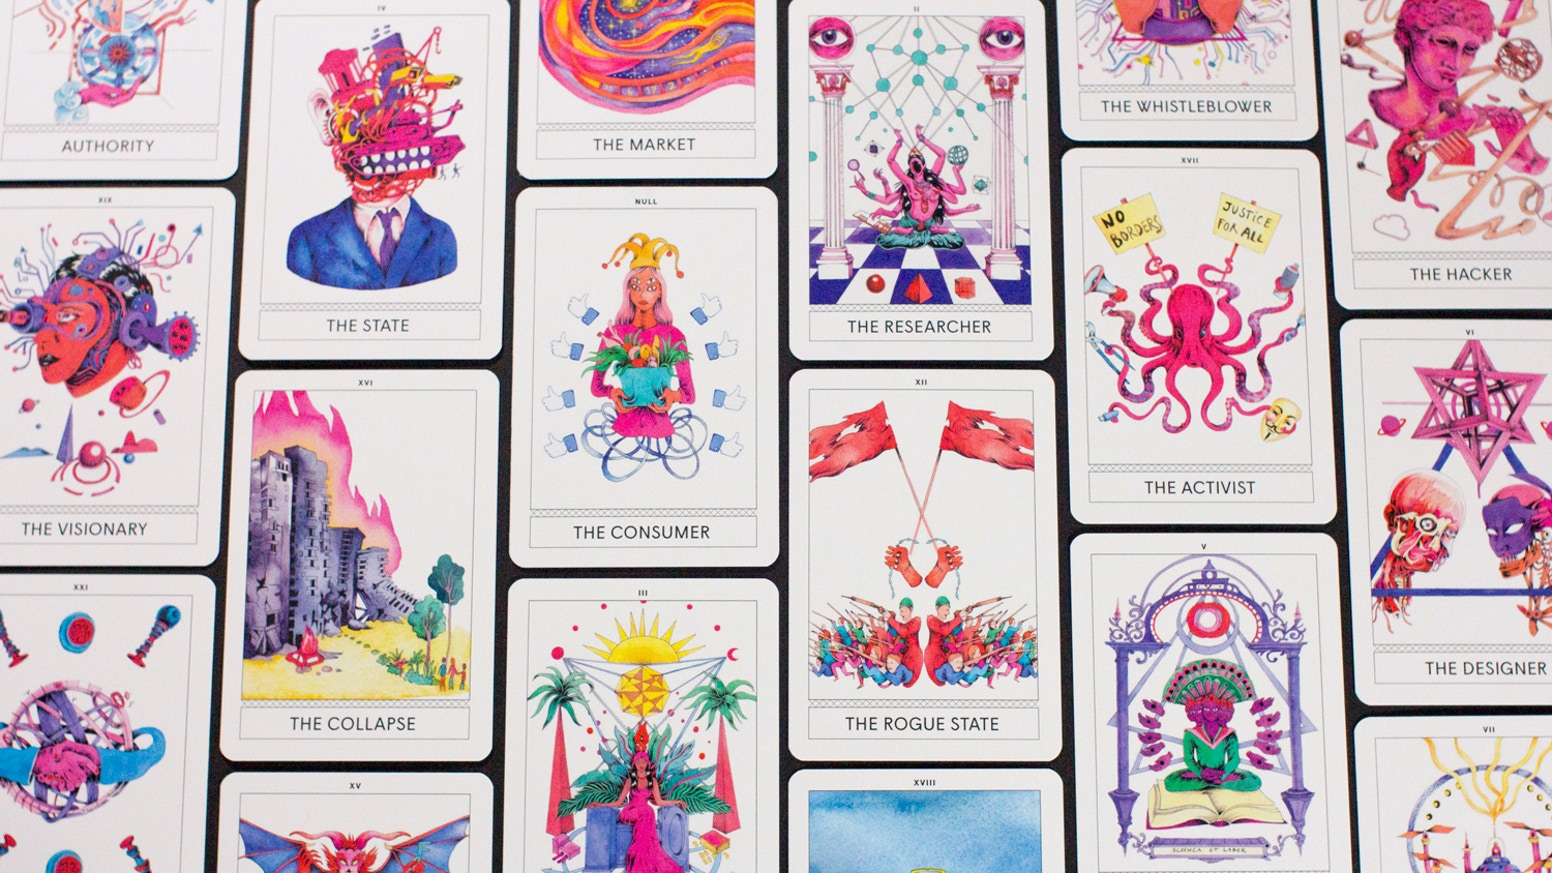 Instant Archetypes: A New Tarot For The New Normal by Superflux (2018)